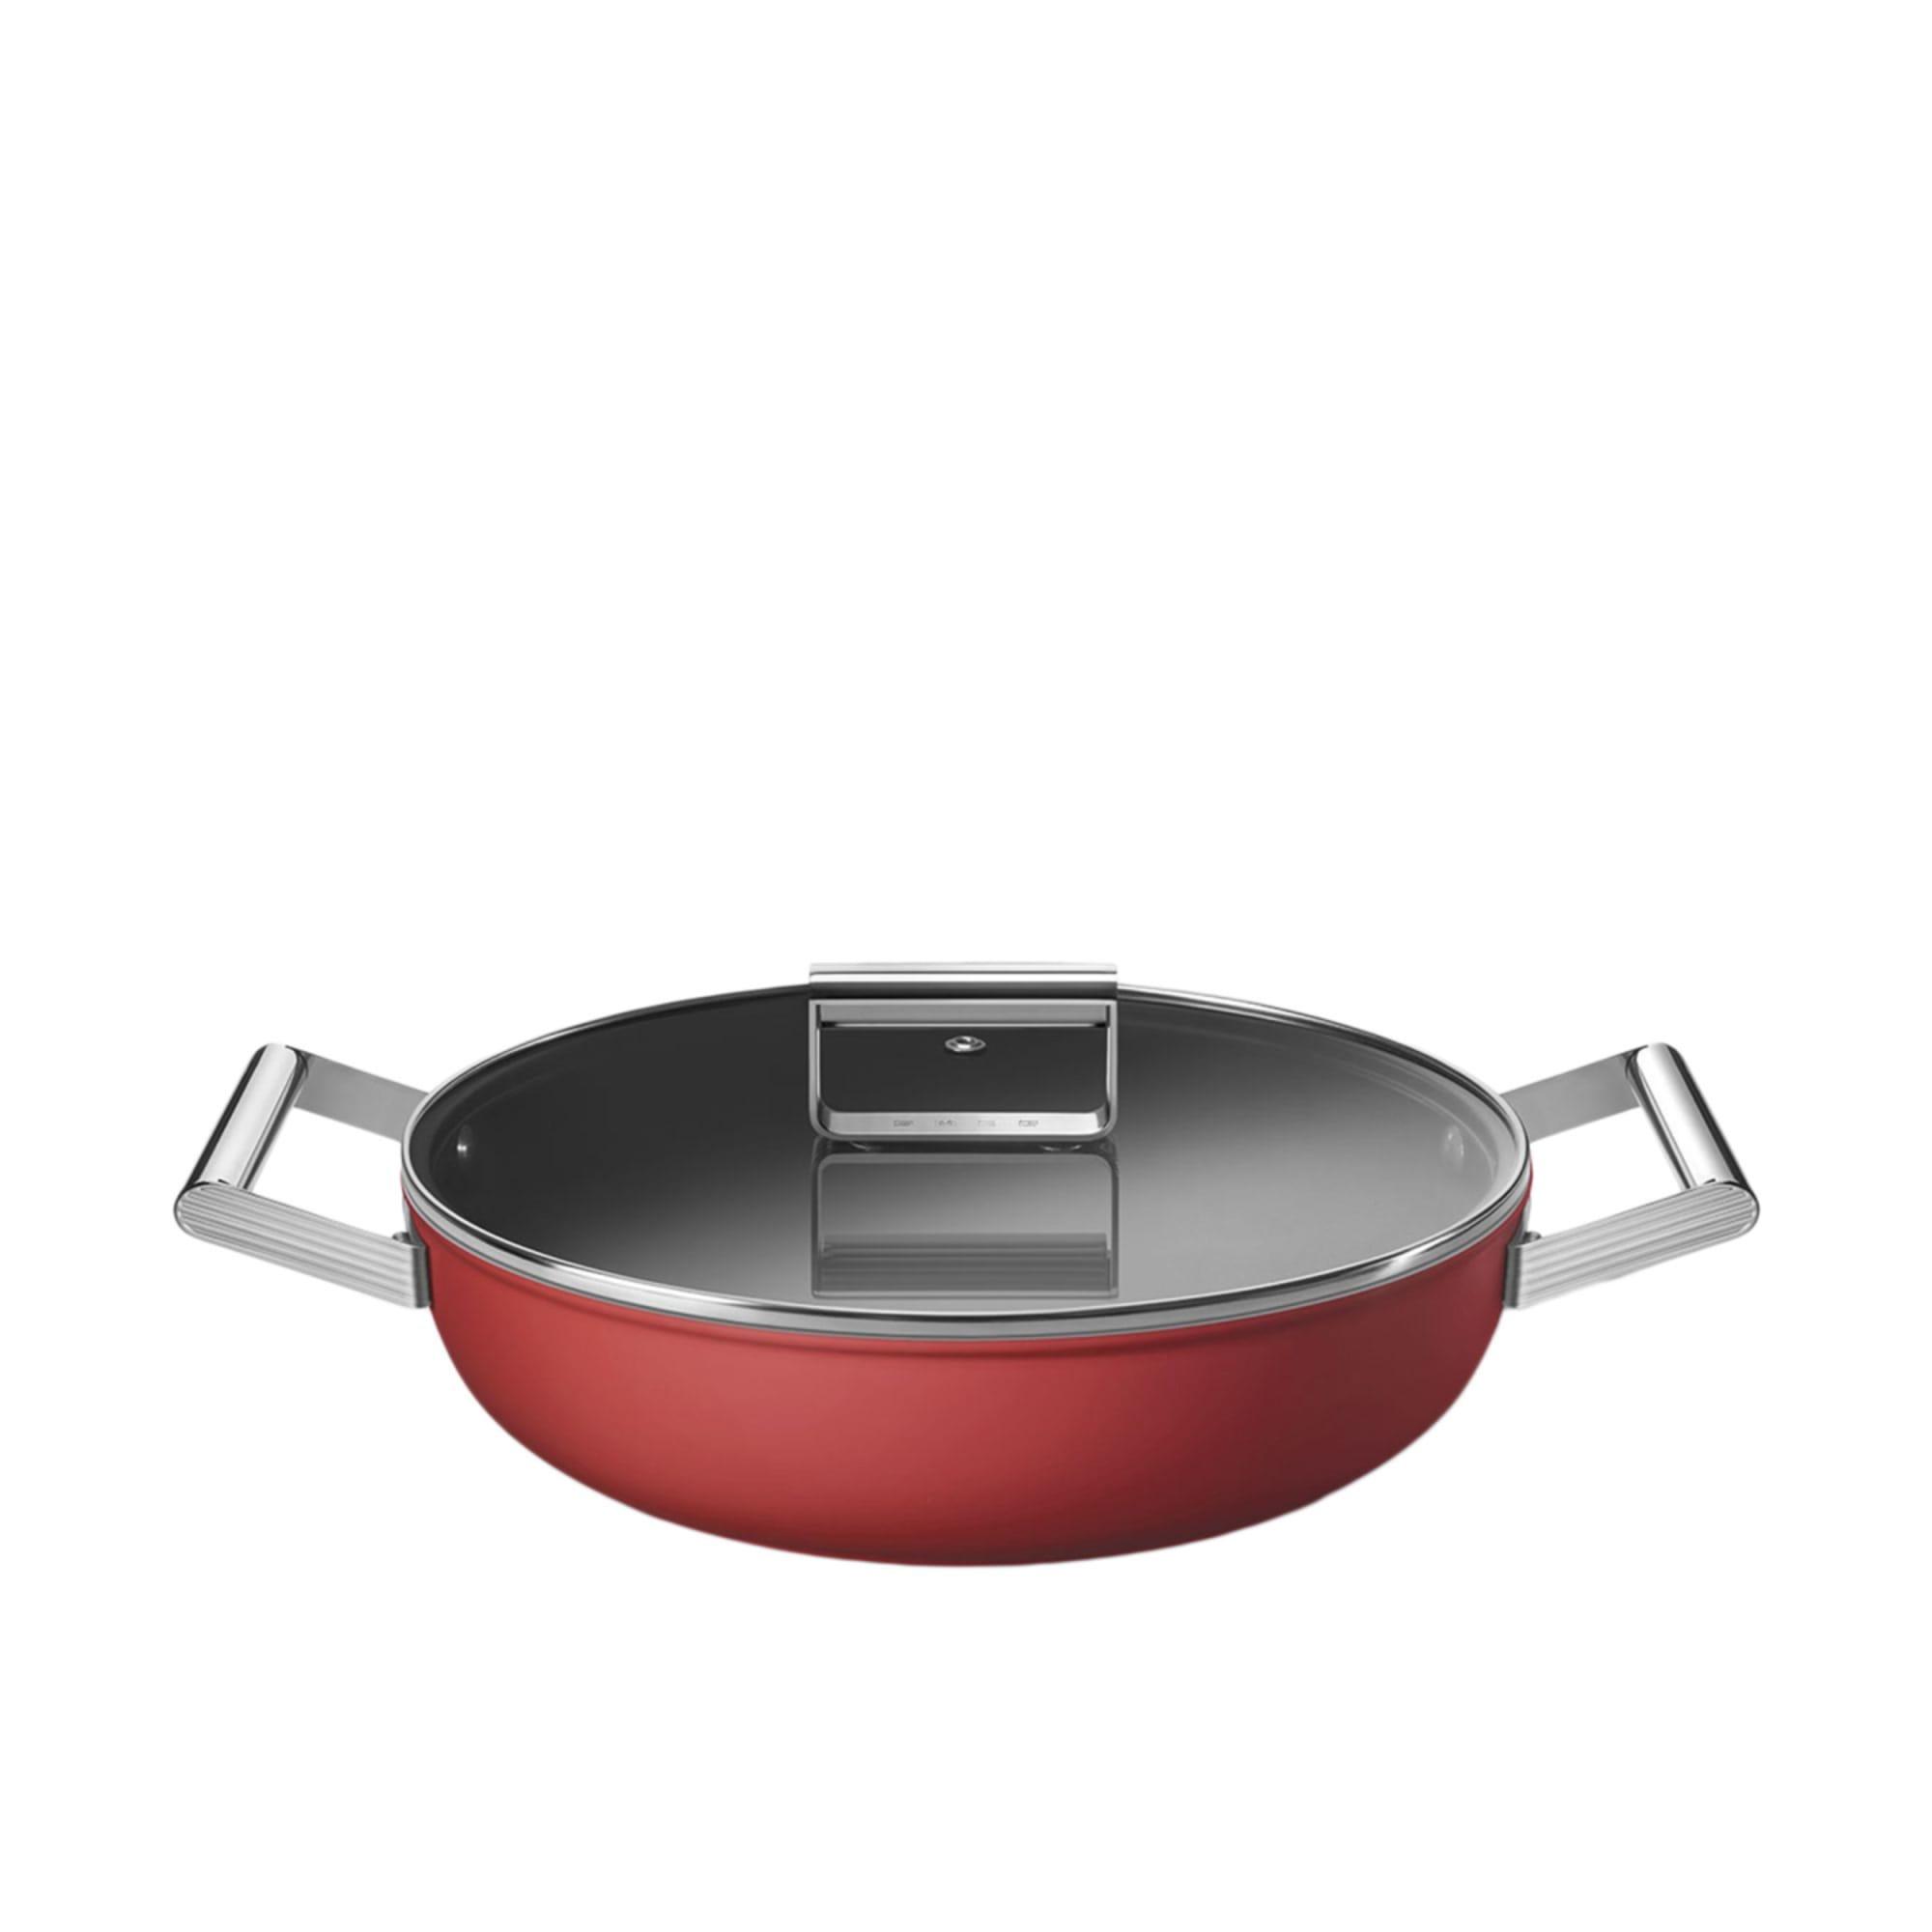 Smeg Non Stick Chef's Pan with Lid 28cm - 3.7L Red Image 1